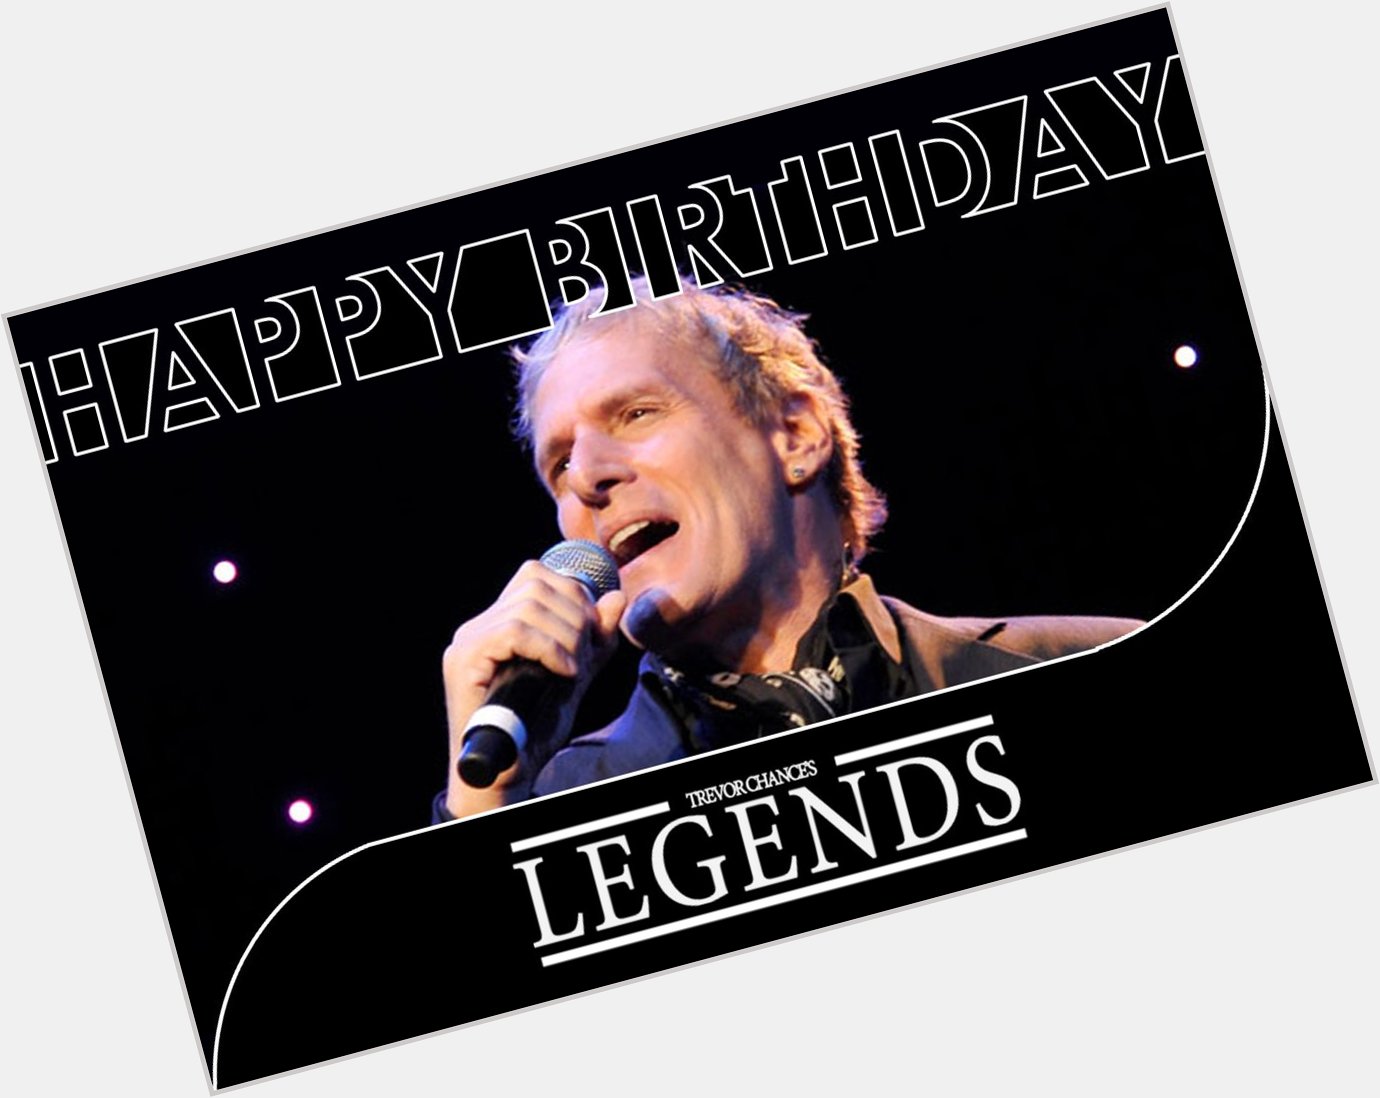 Happy Birthday, Michael Bolton! The master of the Power Ballad turns 64 today... 